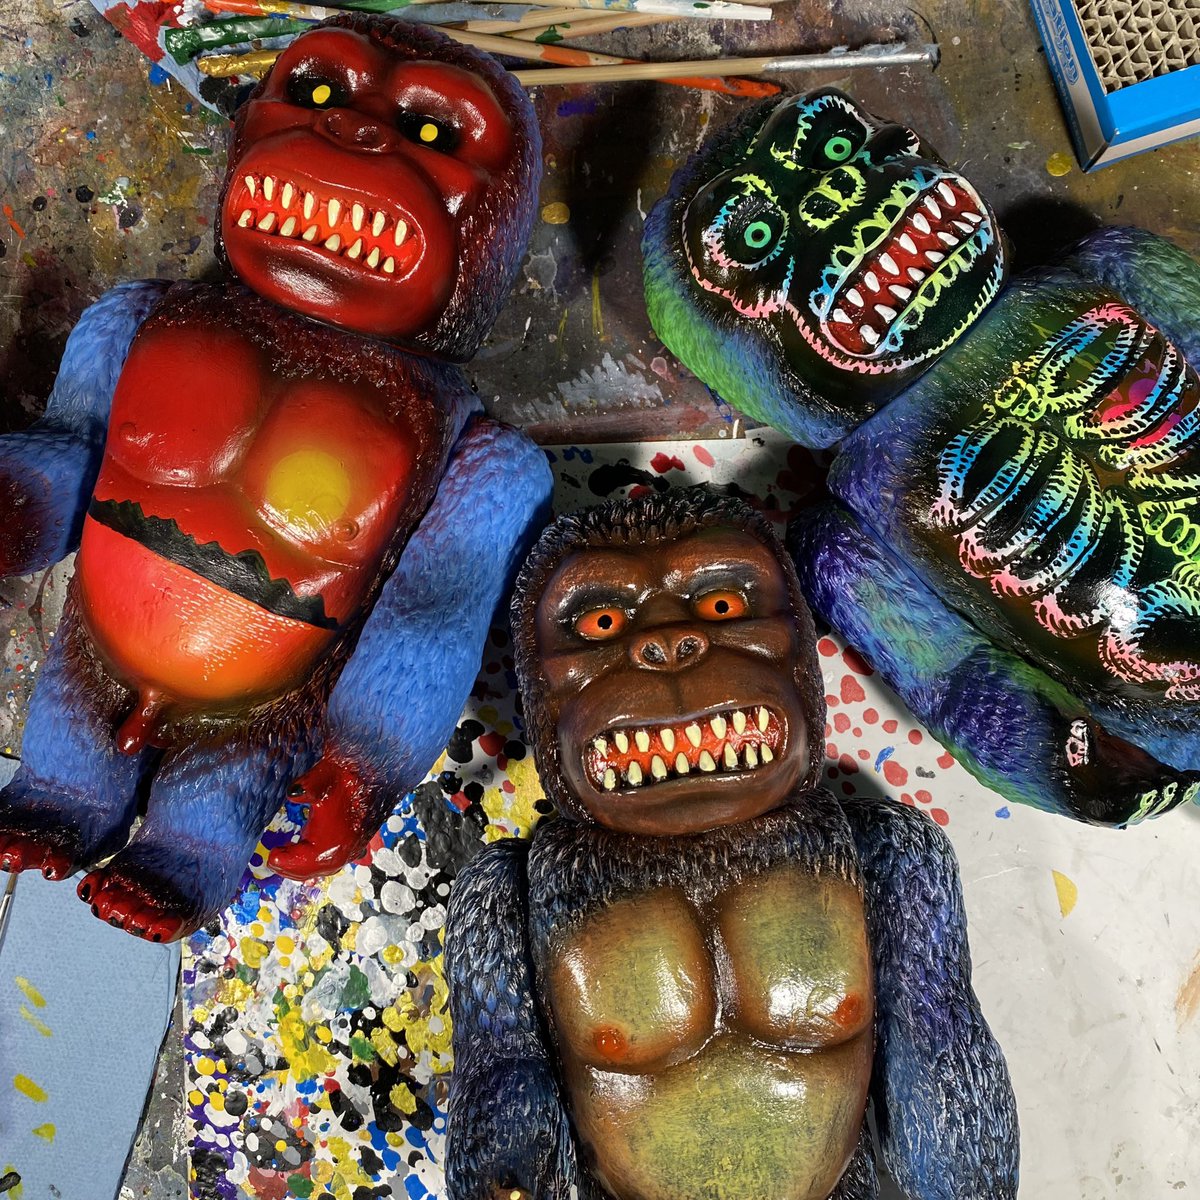 Wip last batch of Apes from artist @frankmysterio_apc ! 🦍 Should be done by the weekend 👍🎉 Using @vinylwonderpaint ✨ #marknagata #nagatacolor #ape #monkey #kaiju #kingkong #airbrush #mexifubi